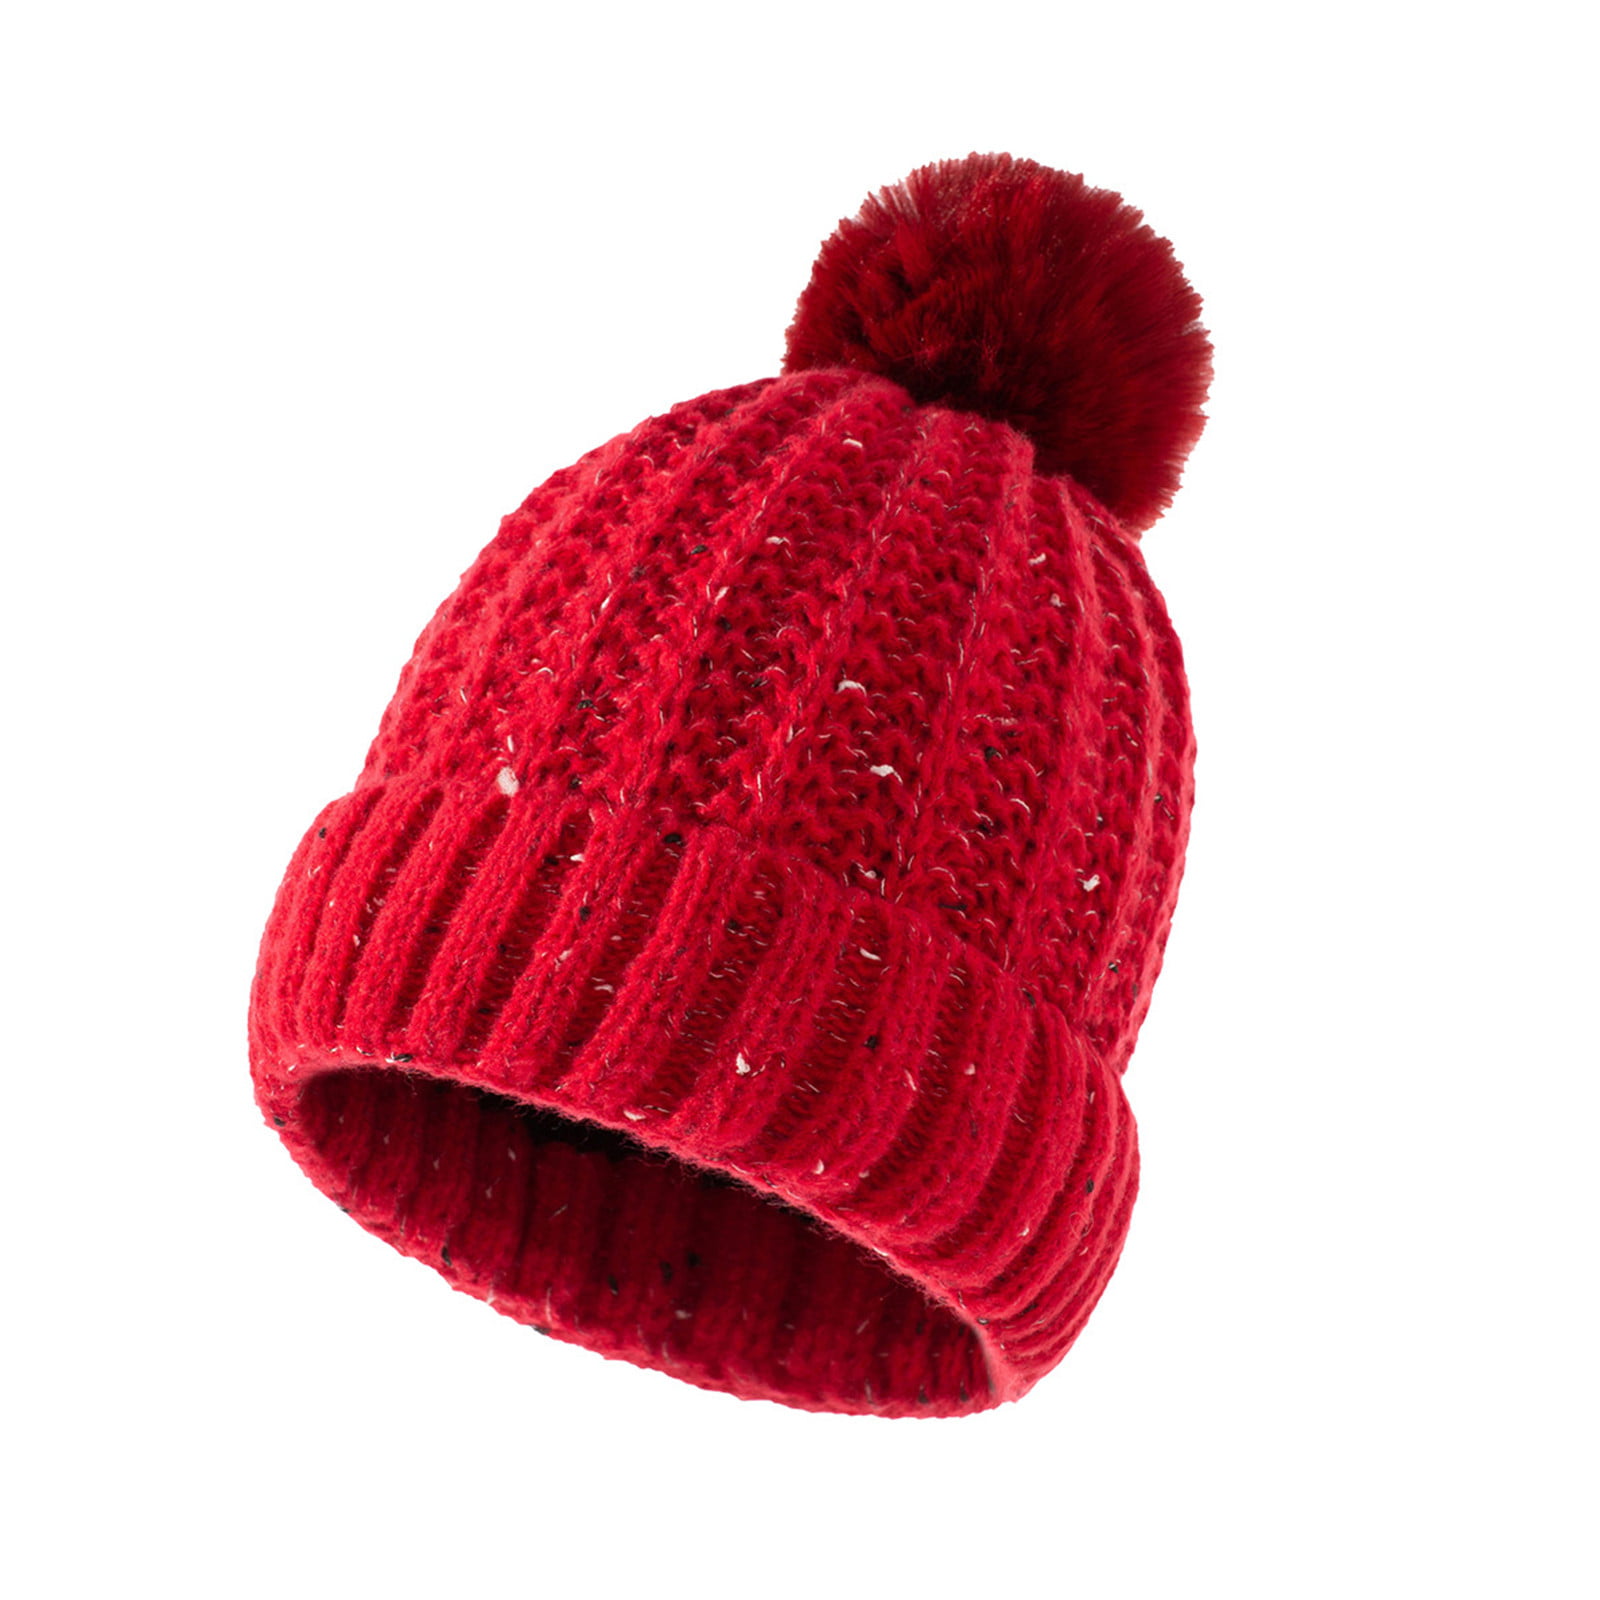 Unisex Mens Womens Winter Warm Knitted Slouch Bobble Pom Hat Beanie Hat 